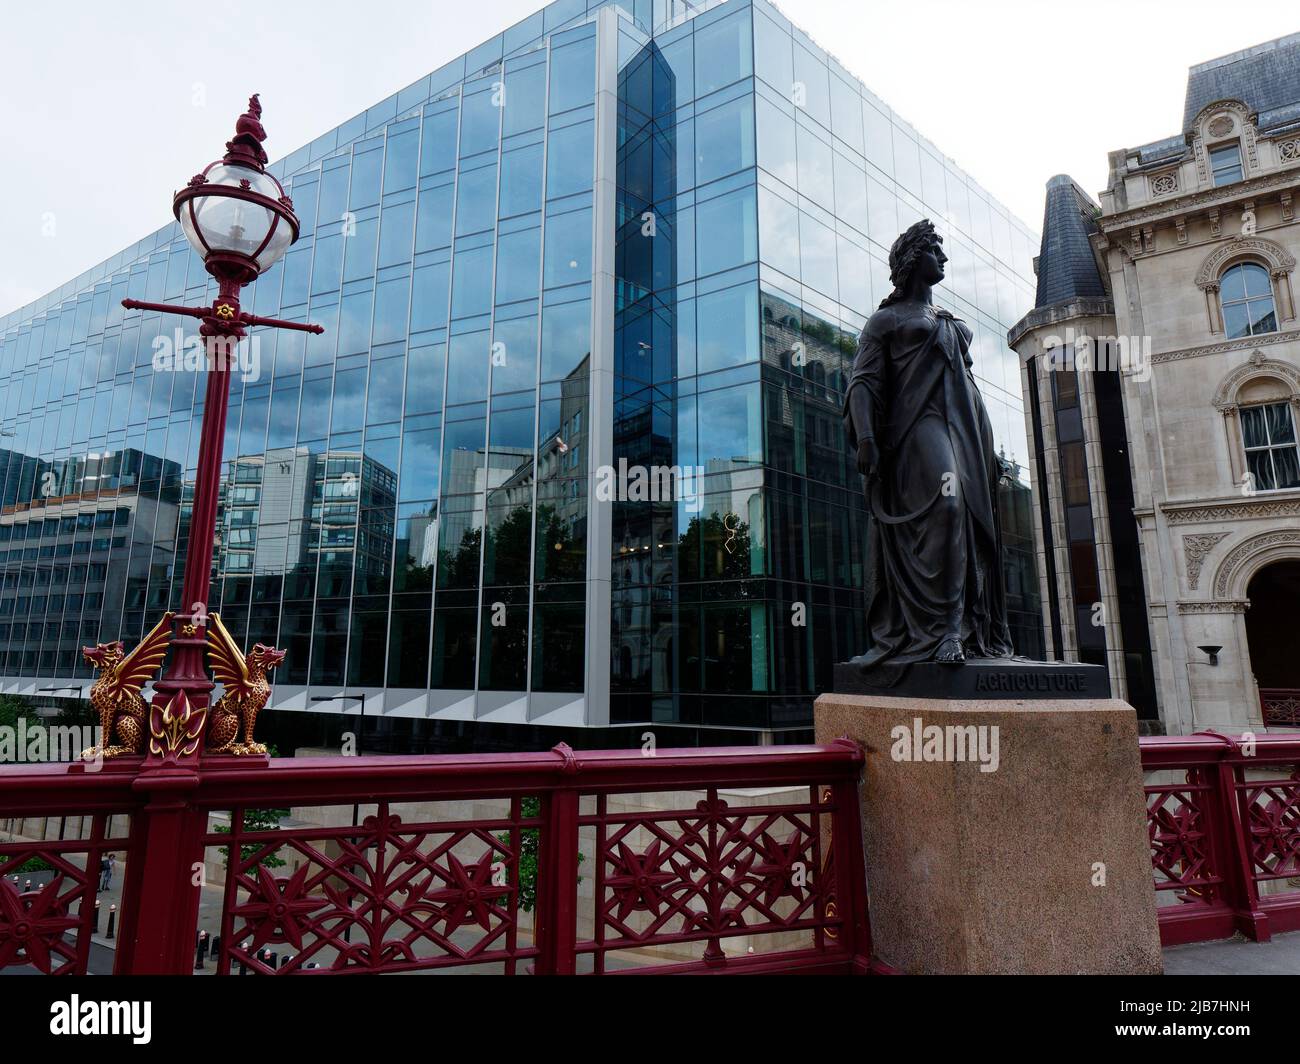 London, Greater London, England, May 21 2022: Holborn viaduct cast iron girder bridge with statue and buildings behind. Stock Photo